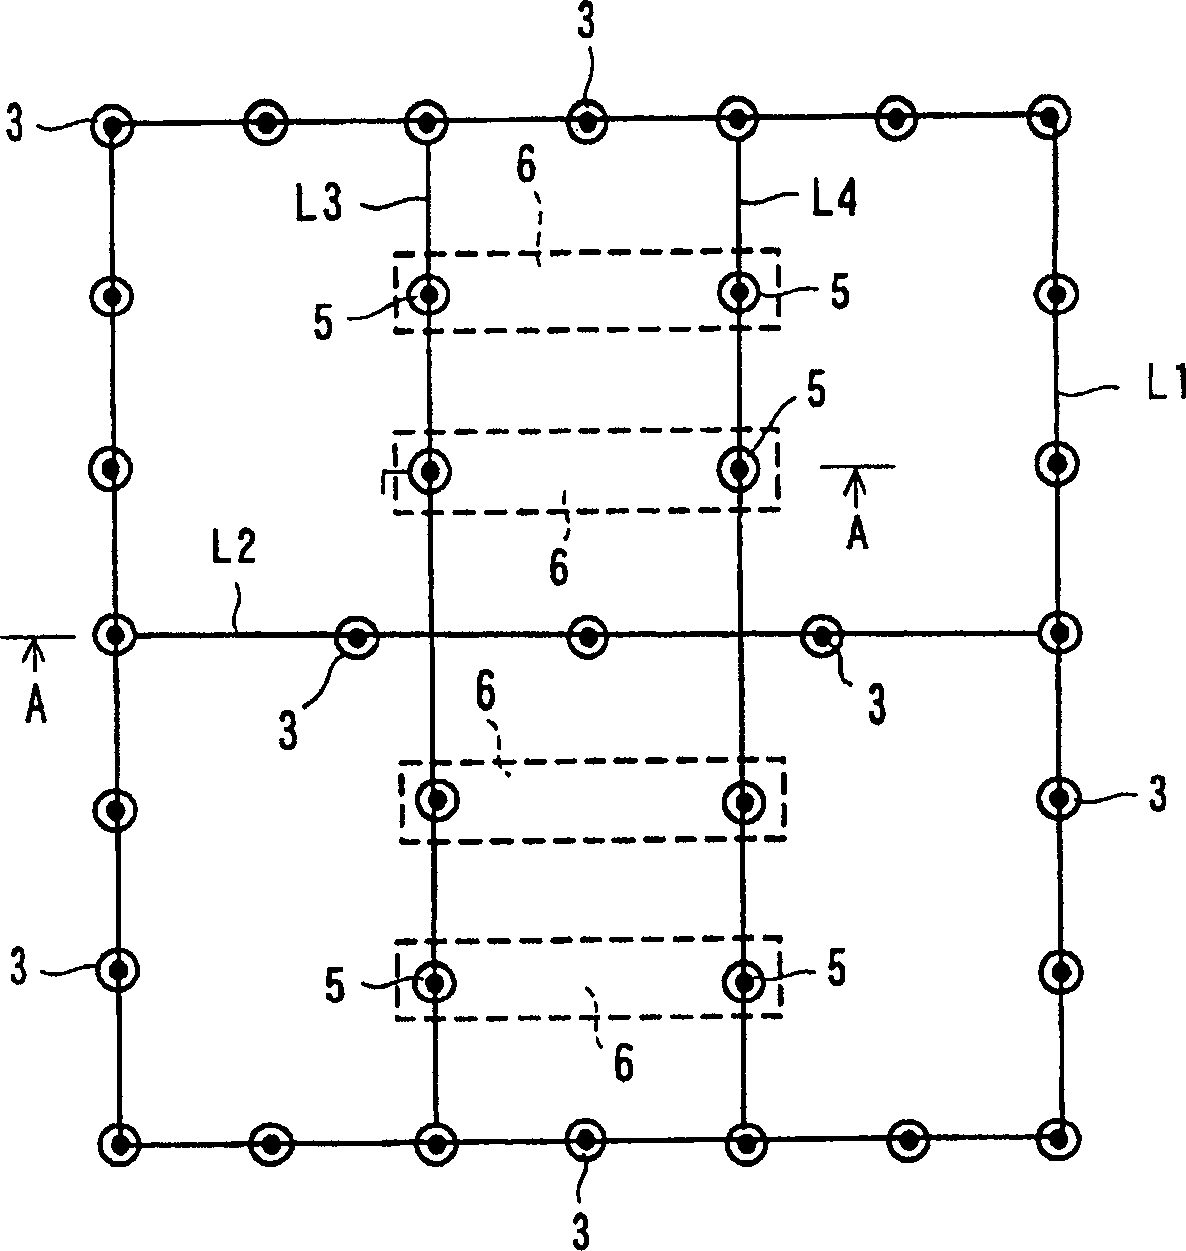 Substrate placing stage